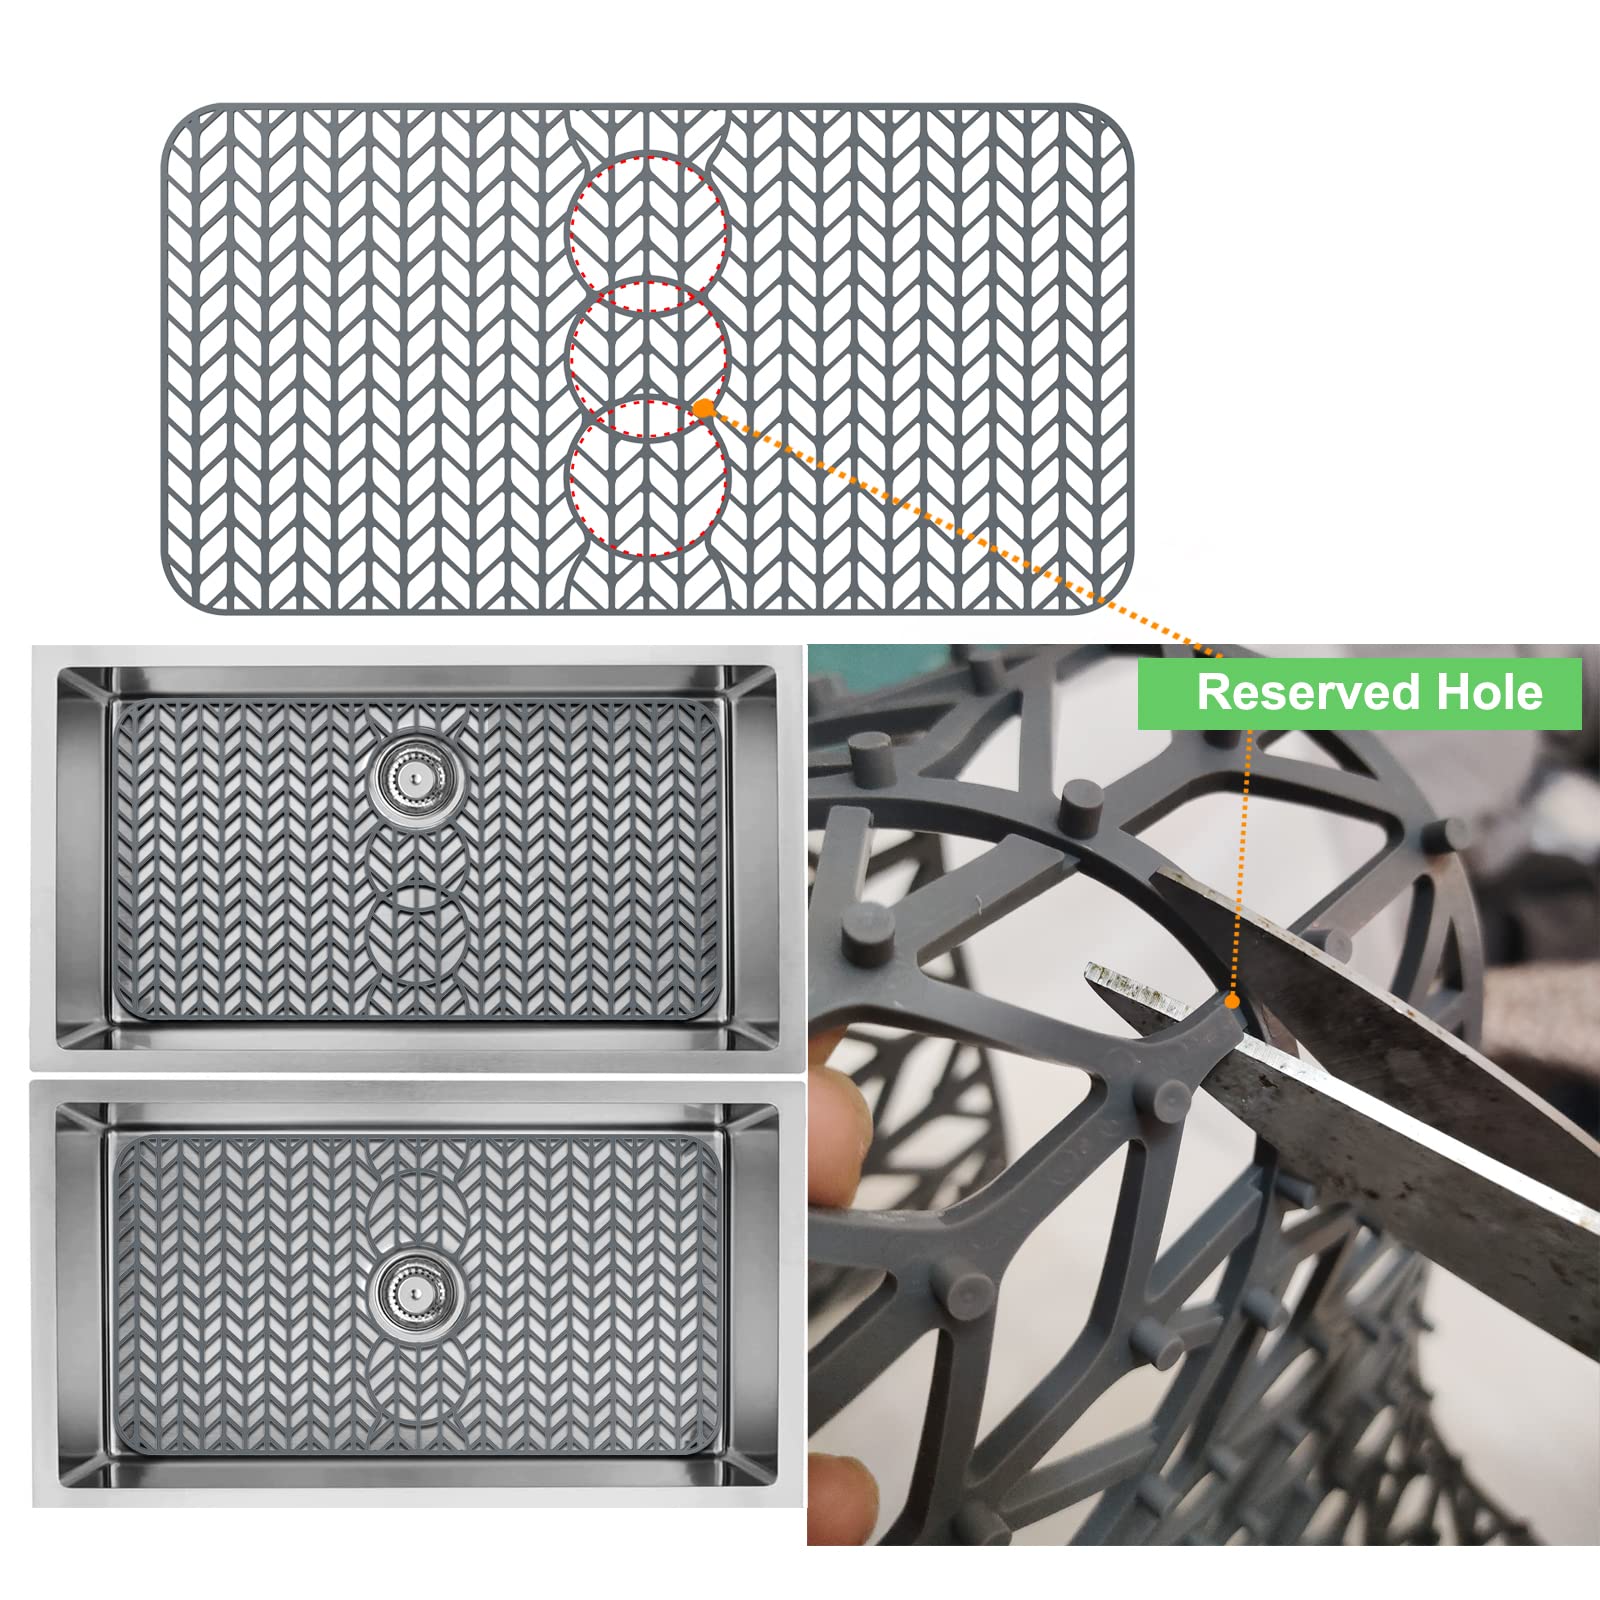 AWOKE Sink Protectors for Kitchen Sink - 29.5"x 15" Sink Mat - Heat-resistant Easy-clean Silicone Sink Mat - for Protection of Stainless Steel Sink - with 3 Reserved Holes (Grey)